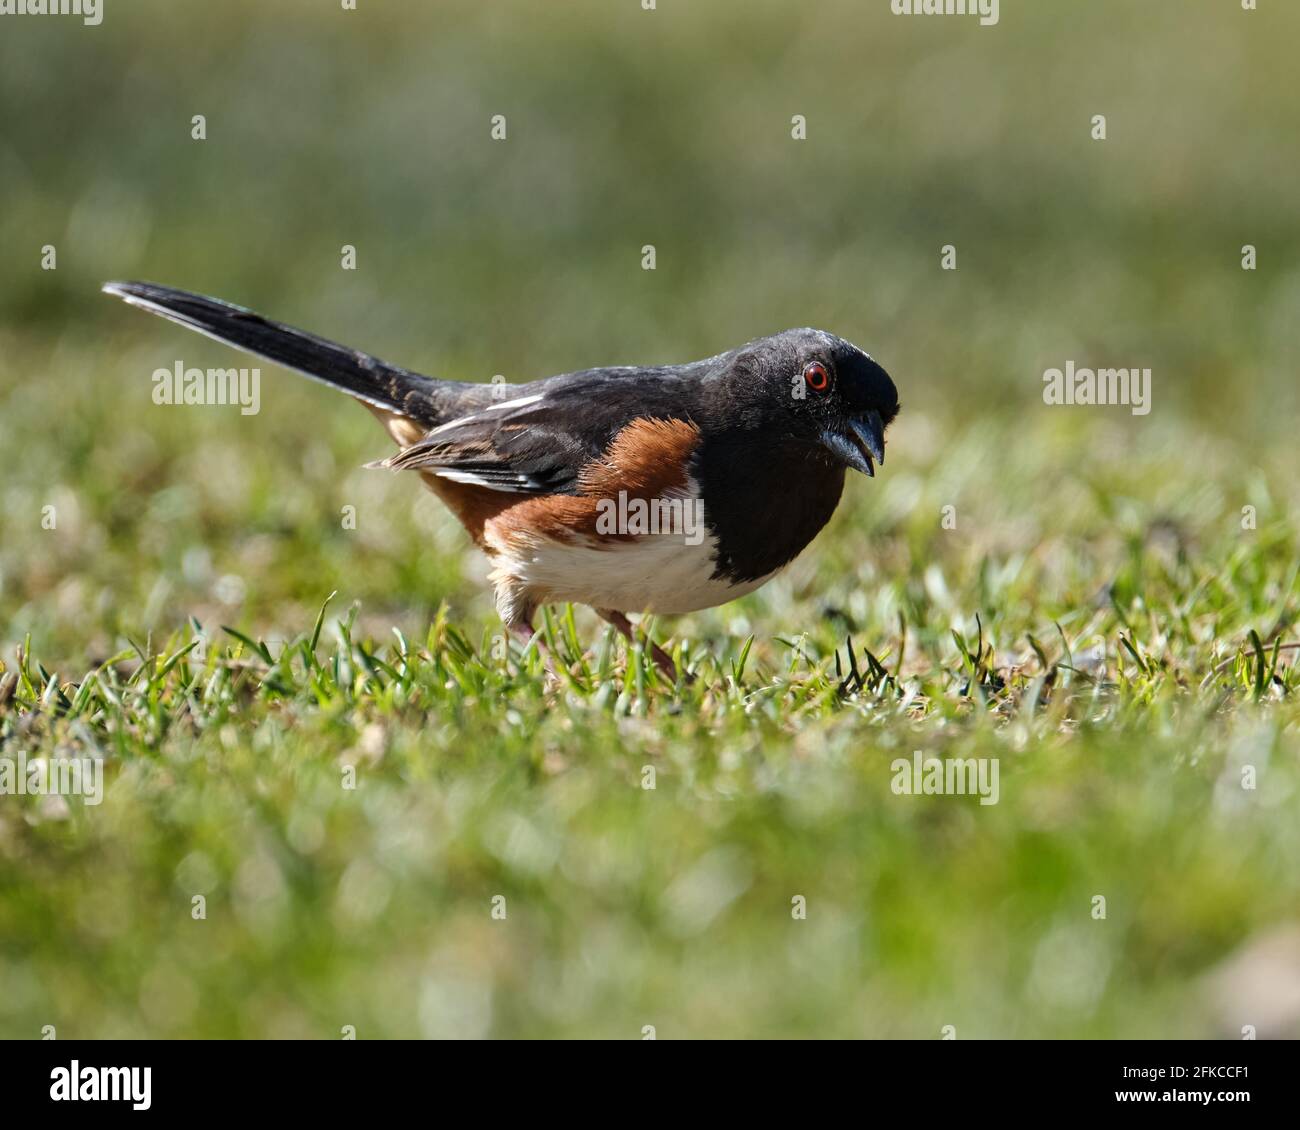 Male Eastern Towhee, Pipilo erythrophthalmus, looking for seeds on ground looking up staring at camera Stock Photo